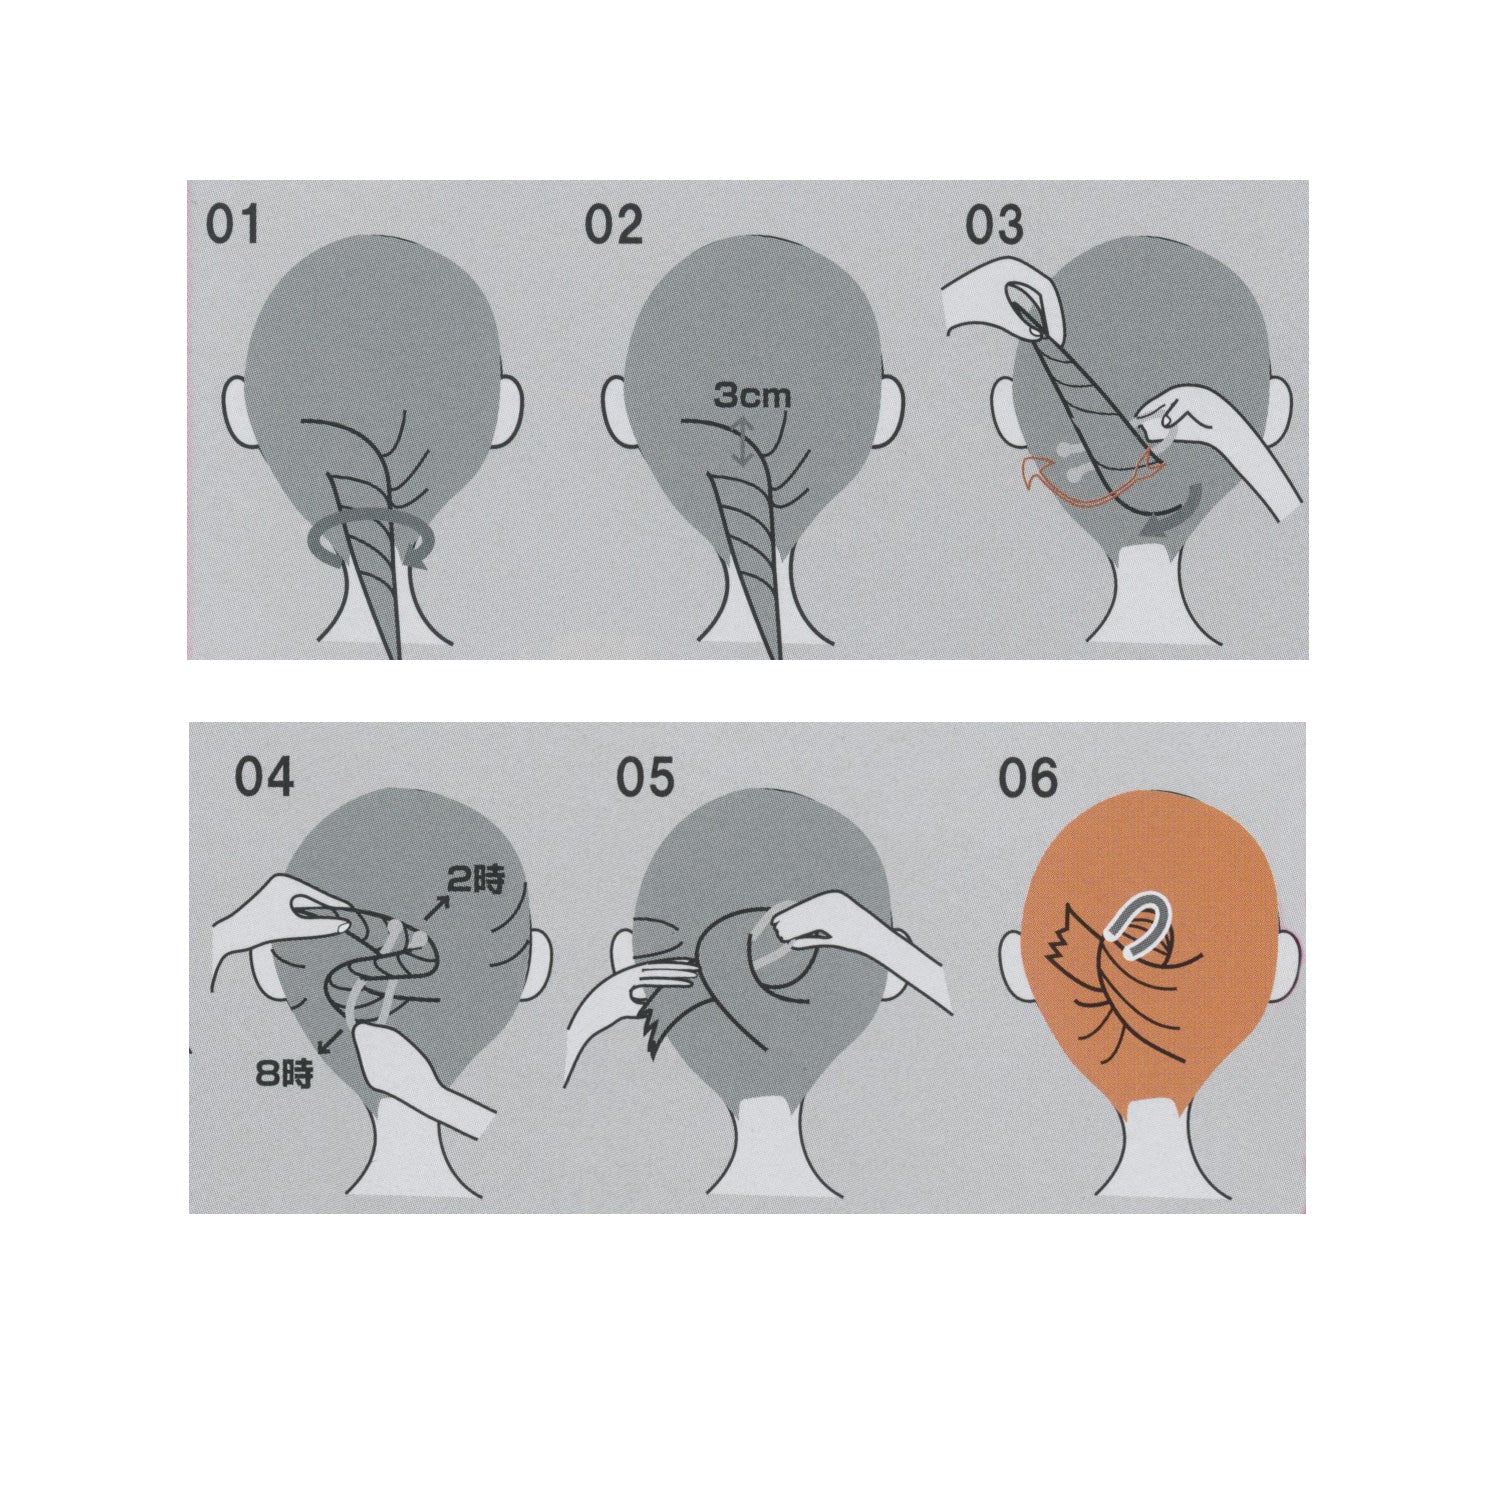 Illustrations on how to use the hair pin.